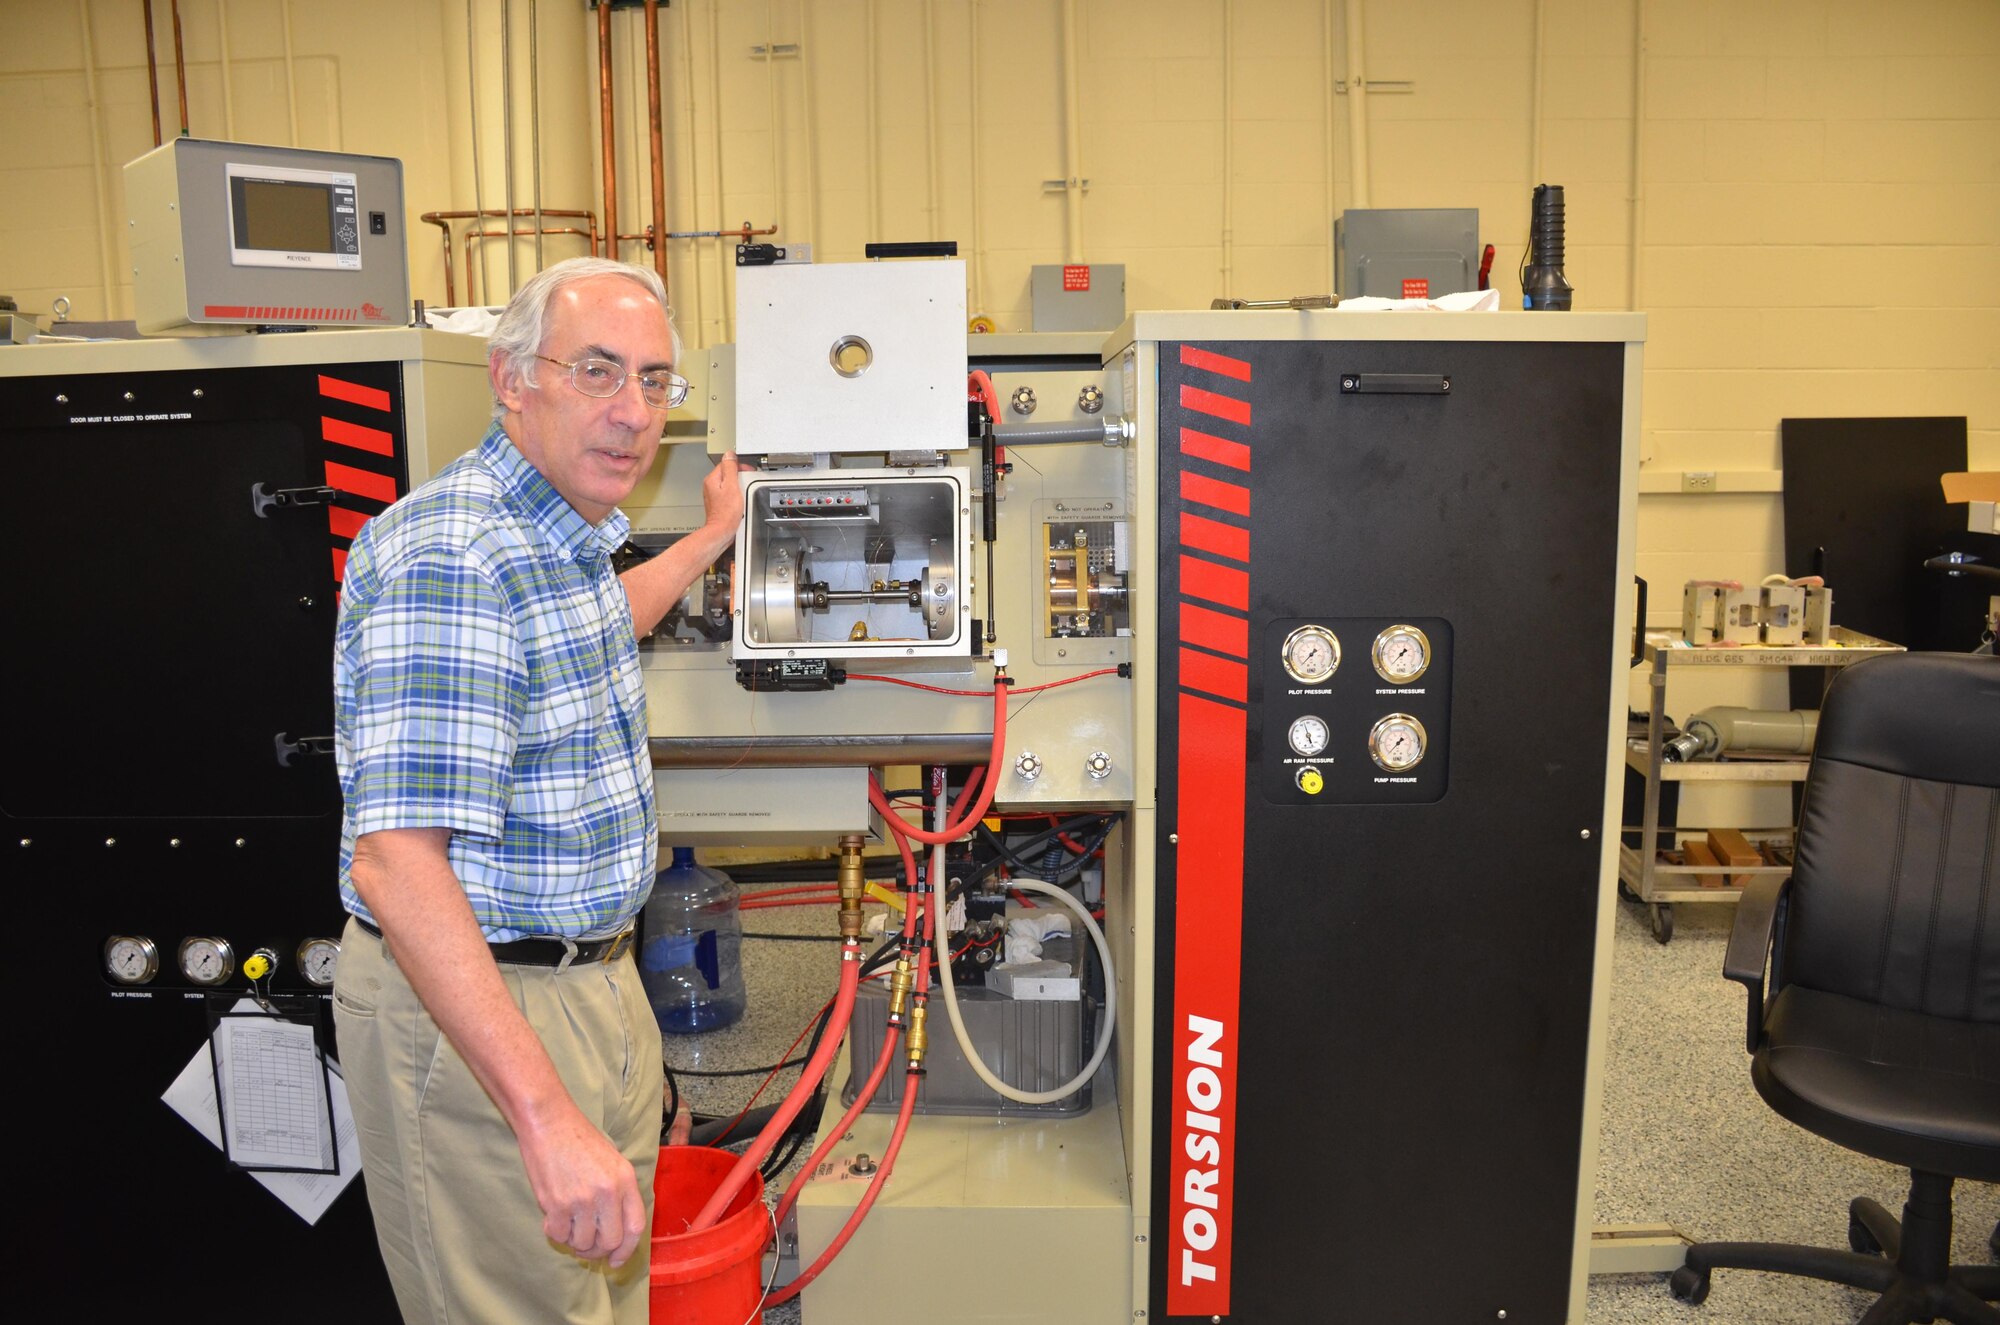 Dr. Sheldon (Lee) Semiatin, senior scientist, Materials and Manufacturing Directorate, Air Force Research Laboratory, uses a Gleeble machine for thermomechanical processing of aerospace alloys. This machine aids projects that require solid state joining of nickel-based superalloys.